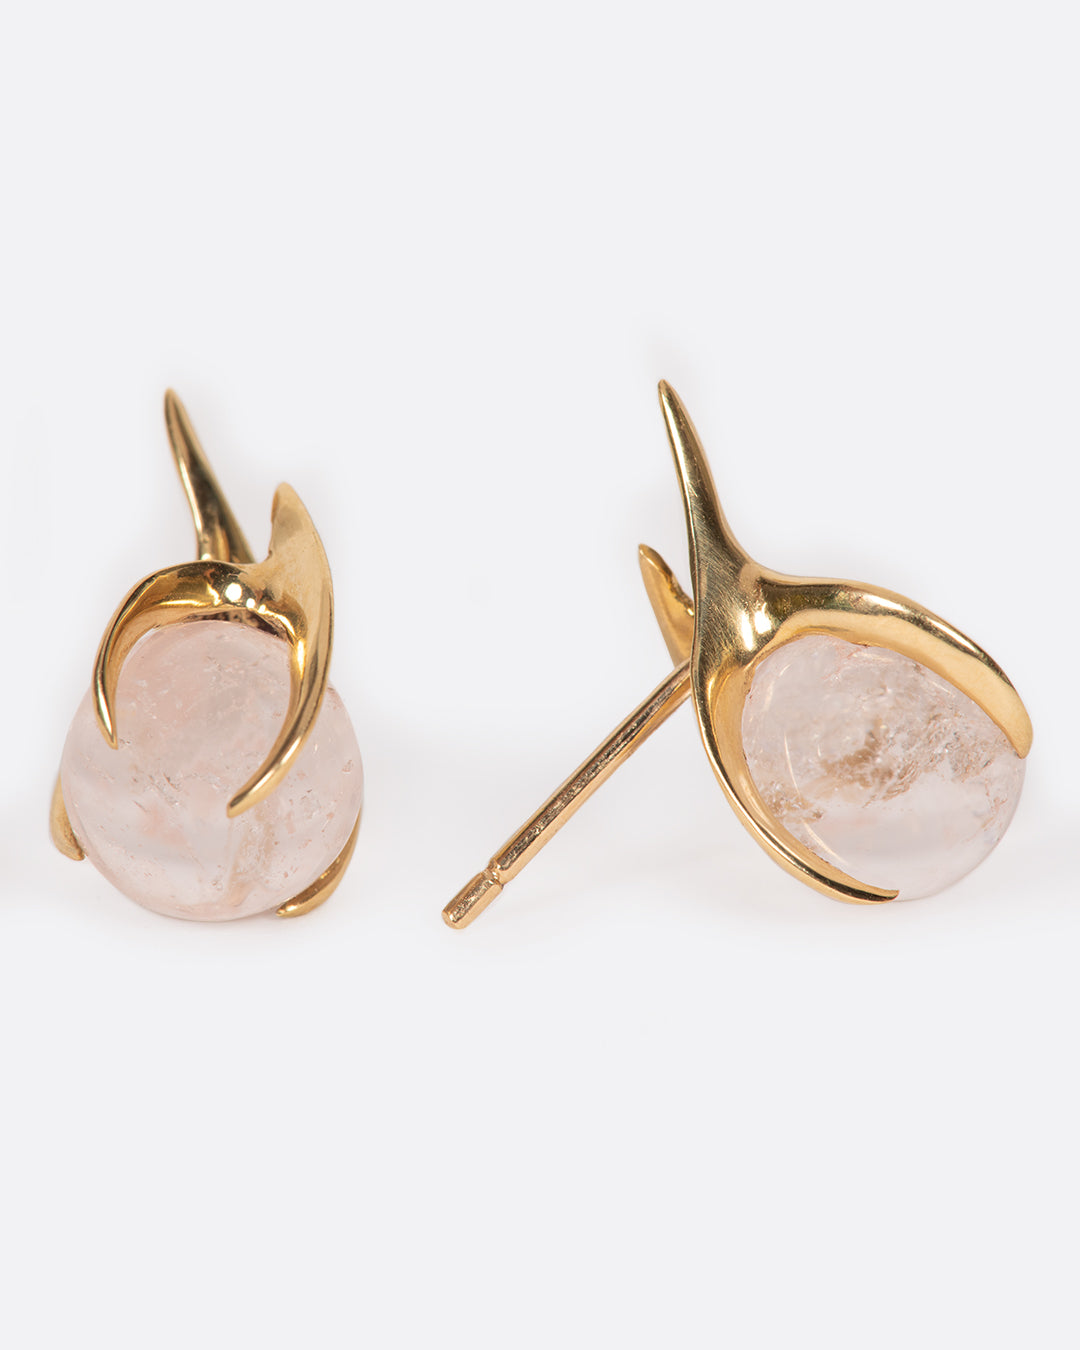 A pair of hand carved prong earrings holding morganite spheres, shown from the side.